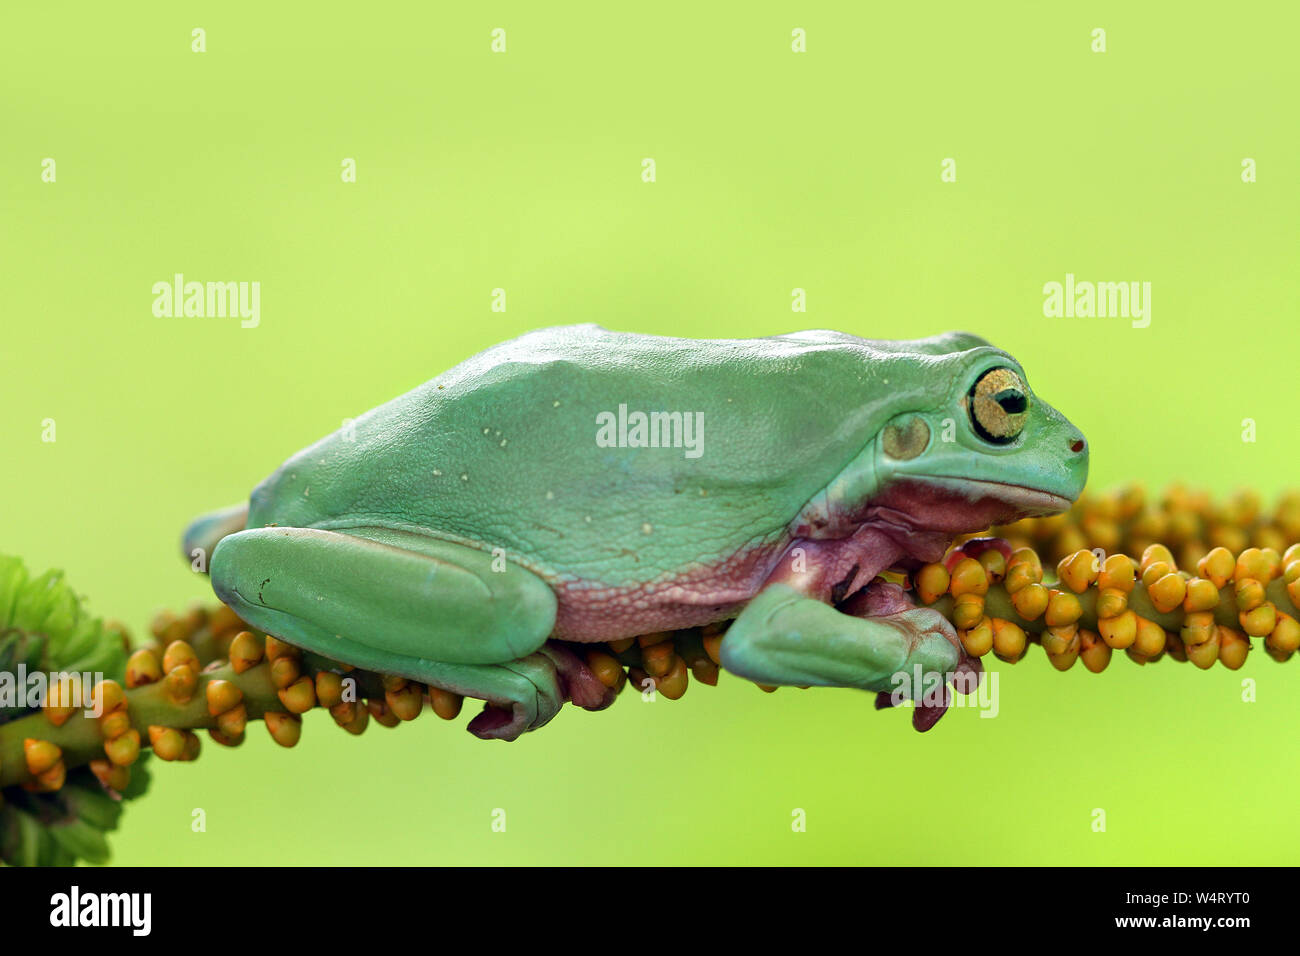 Dumpy tree frog on a branch, Indonesia Stock Photo